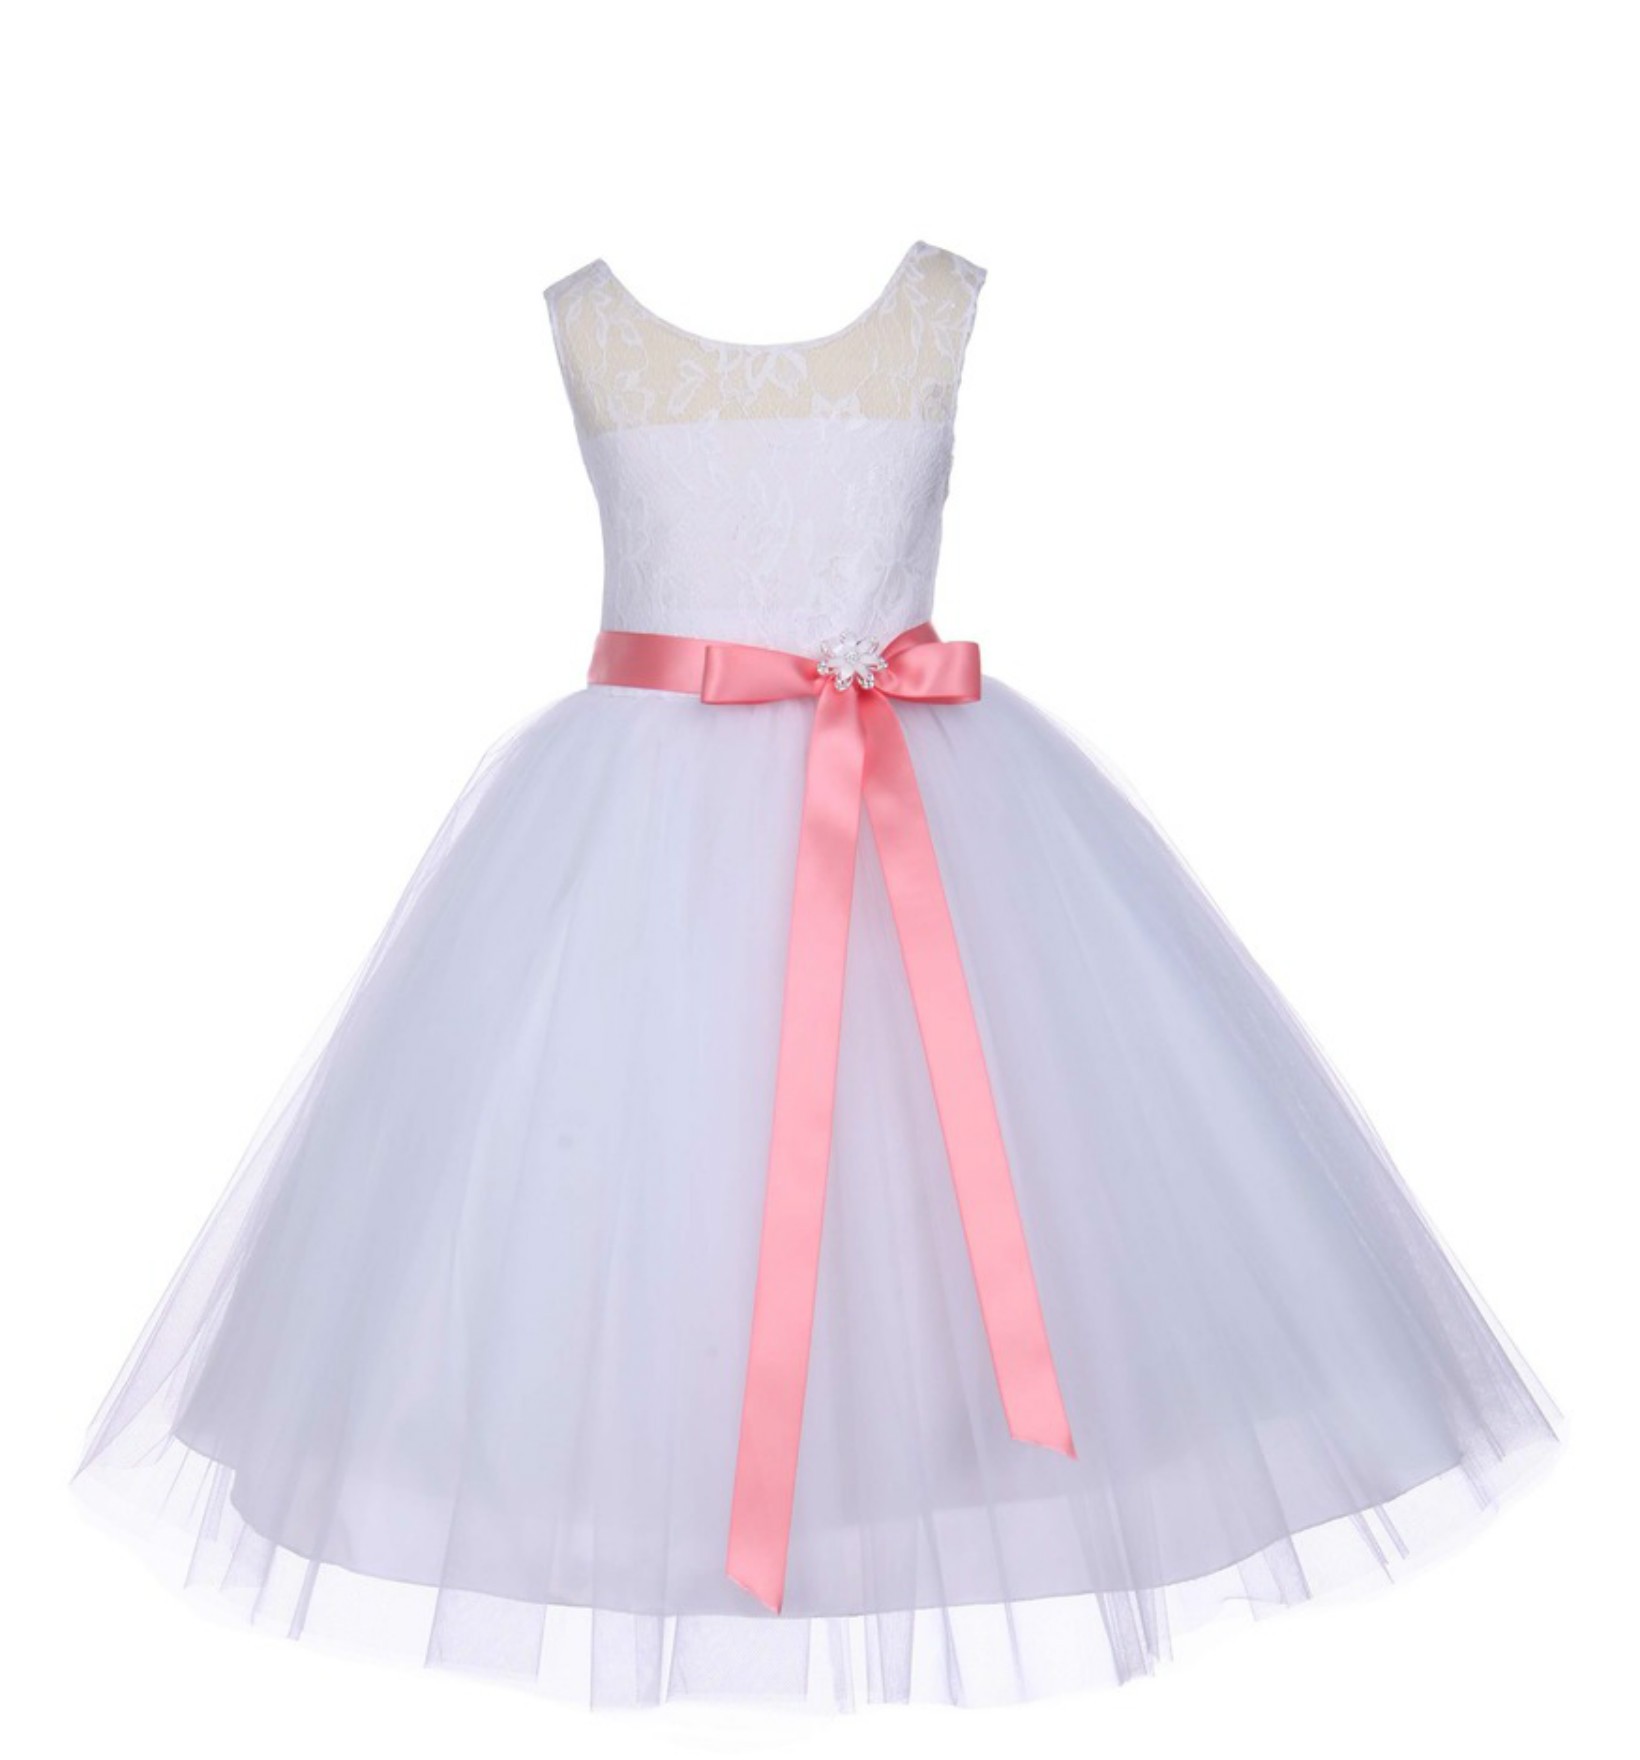 White Floral Lace Bodice Tulle Coral Ribbon Flower Girl Dress 153R